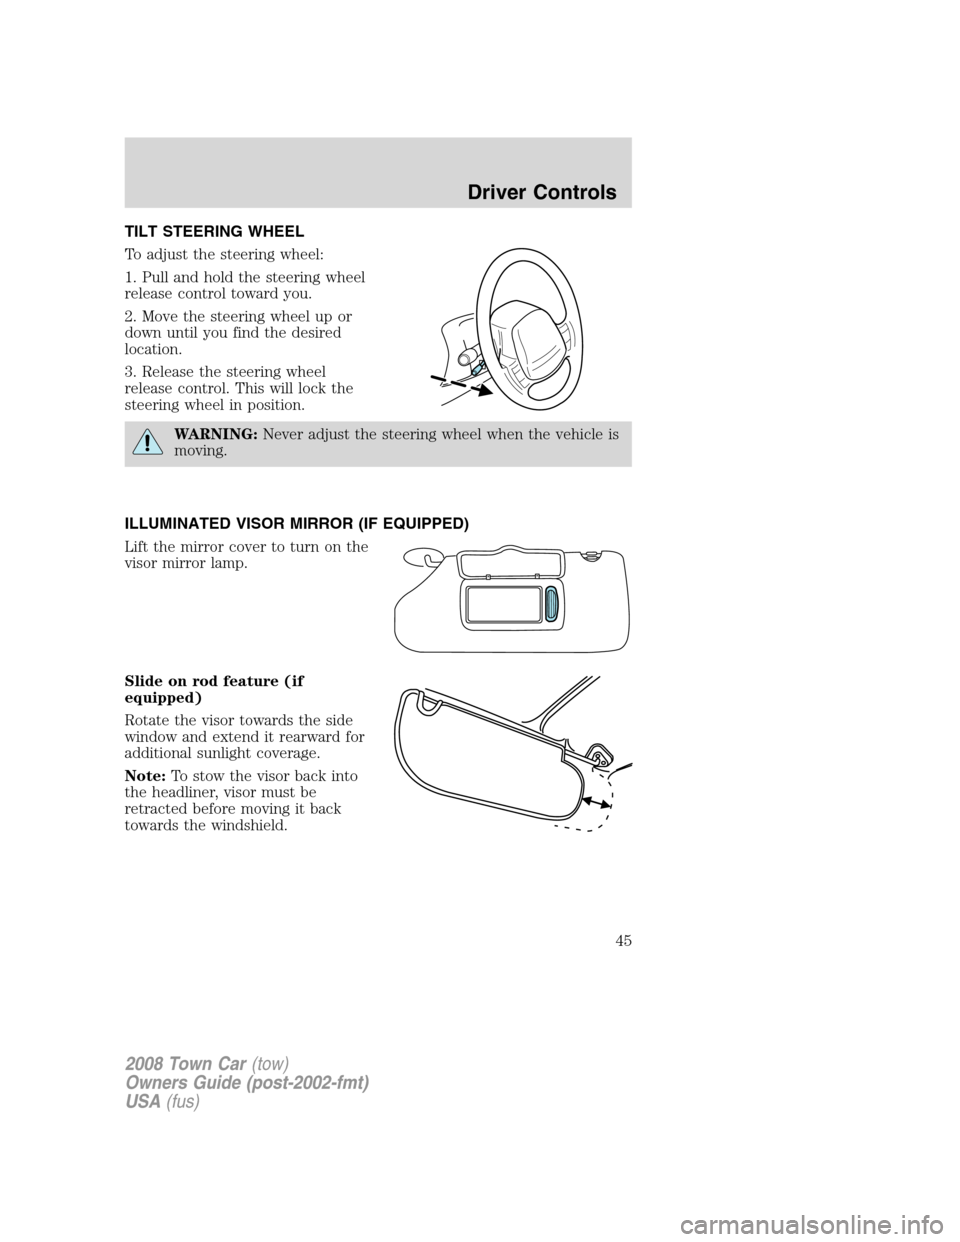 LINCOLN TOWN CAR 2008 User Guide TILT STEERING WHEEL
To adjust the steering wheel:
1. Pull and hold the steering wheel
release control toward you.
2. Move the steering wheel up or
down until you find the desired
location.
3. Release 